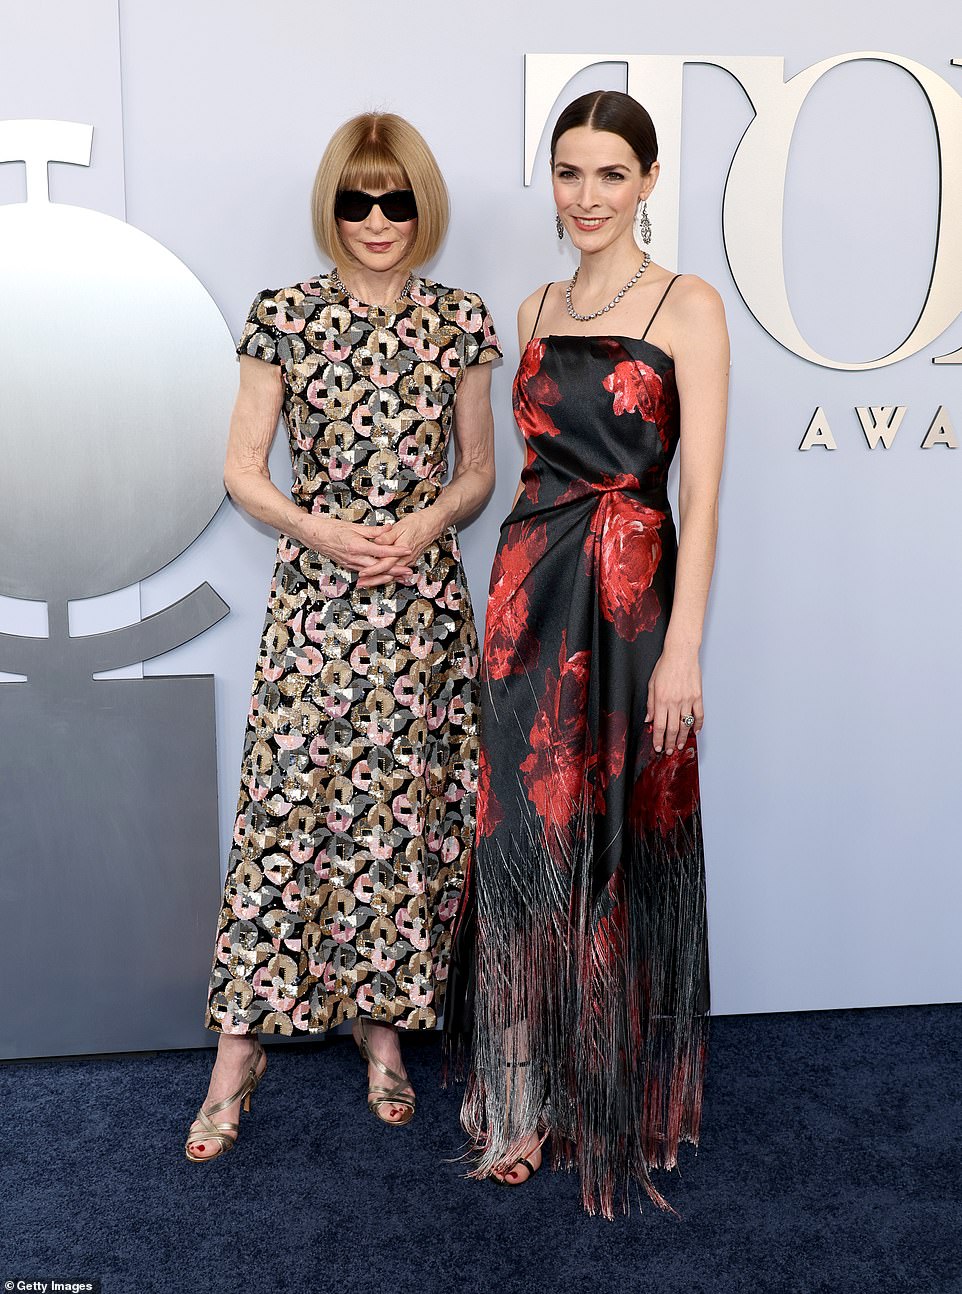 Anna Wintour and her daughter Bee Carrozzini both looked stylish on the red carpet